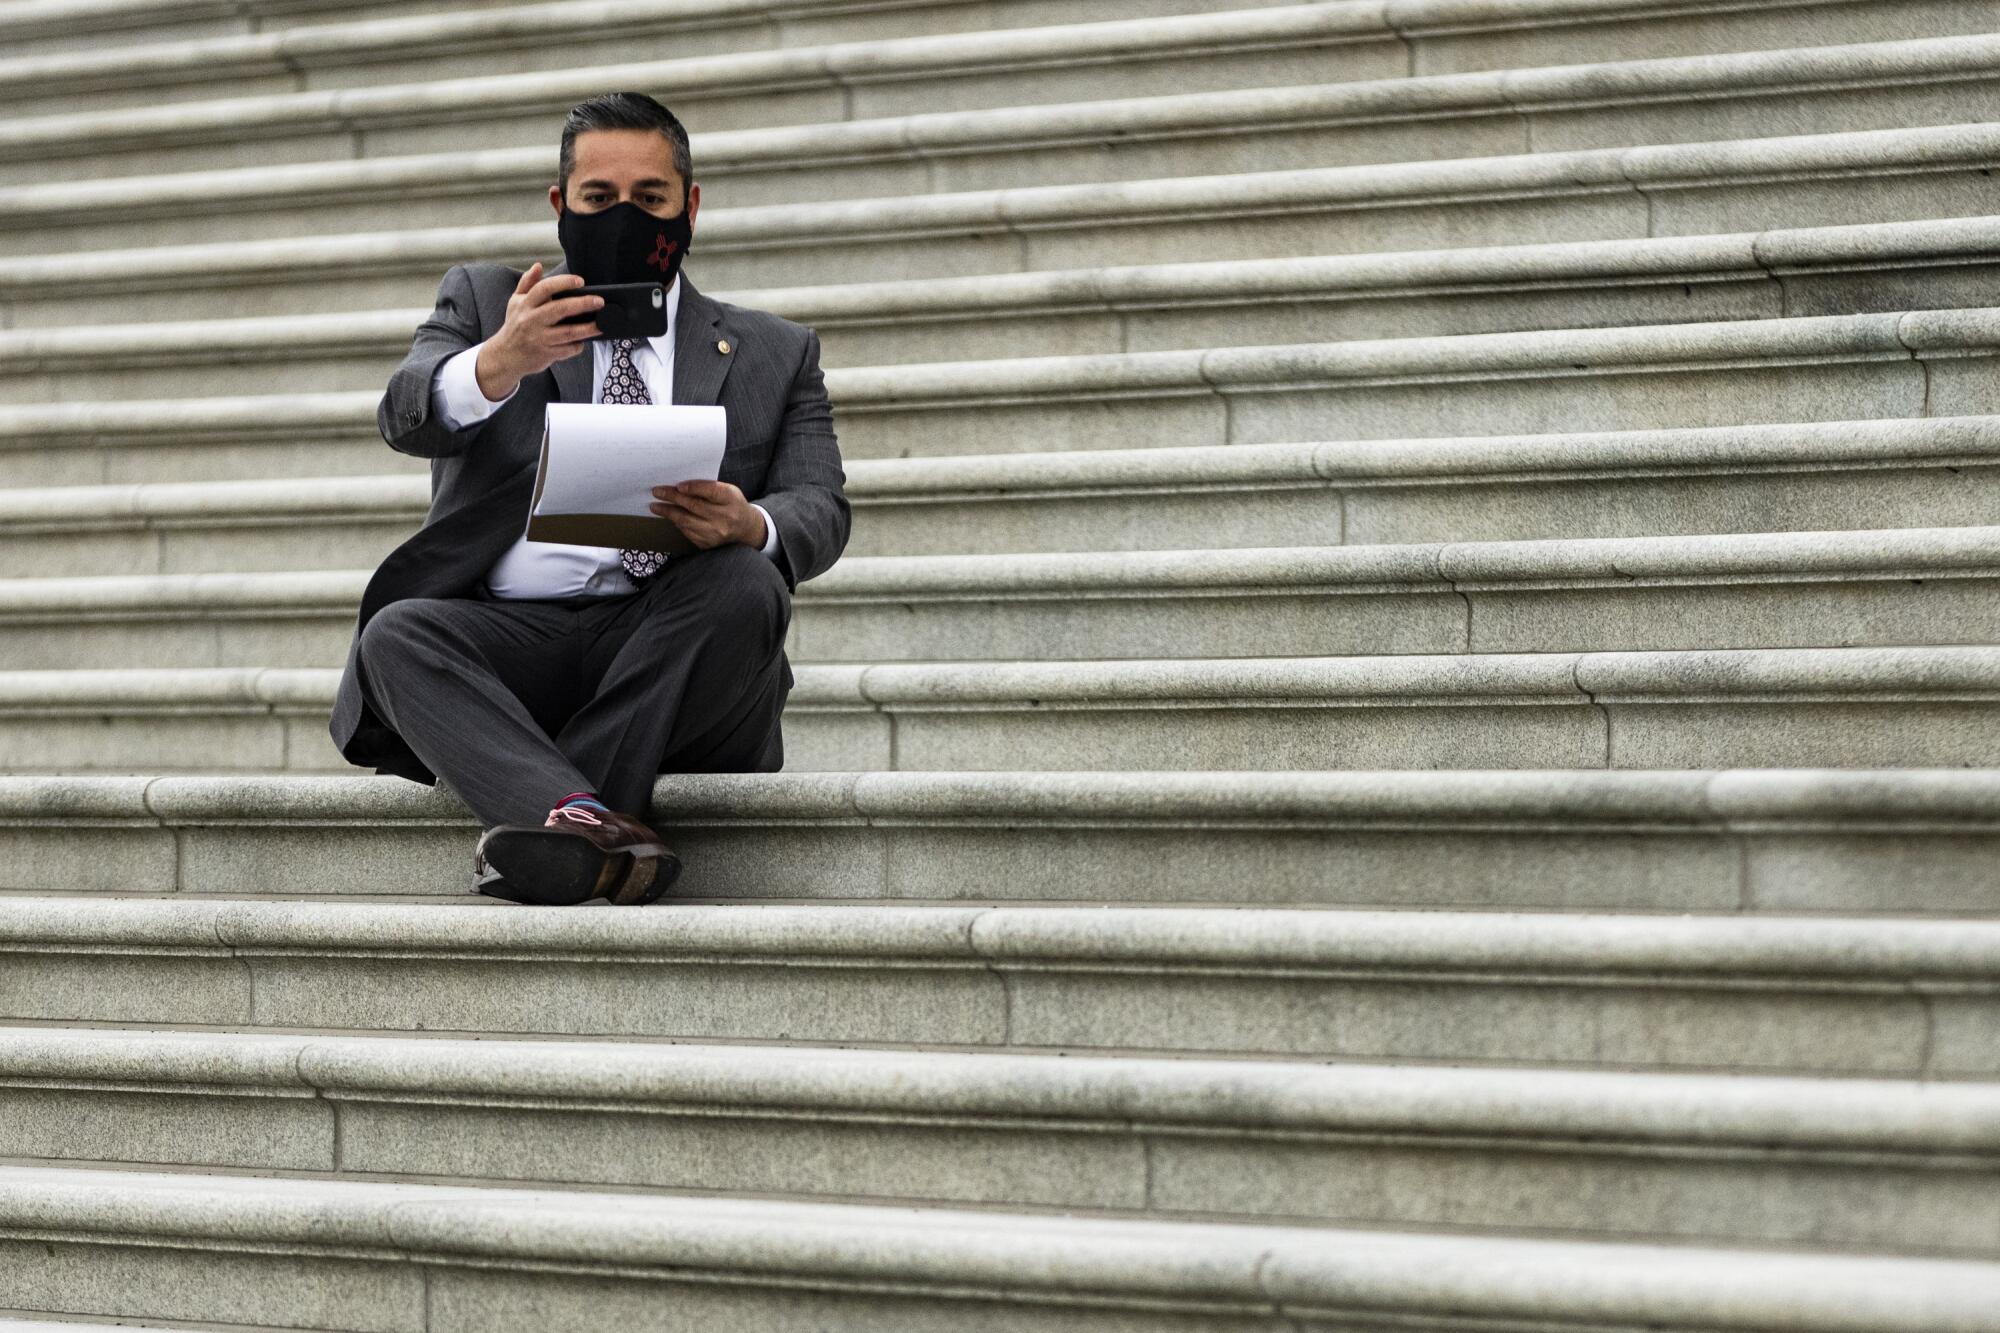 A senator in a mask sits on the Capitol steps while holding up his phone